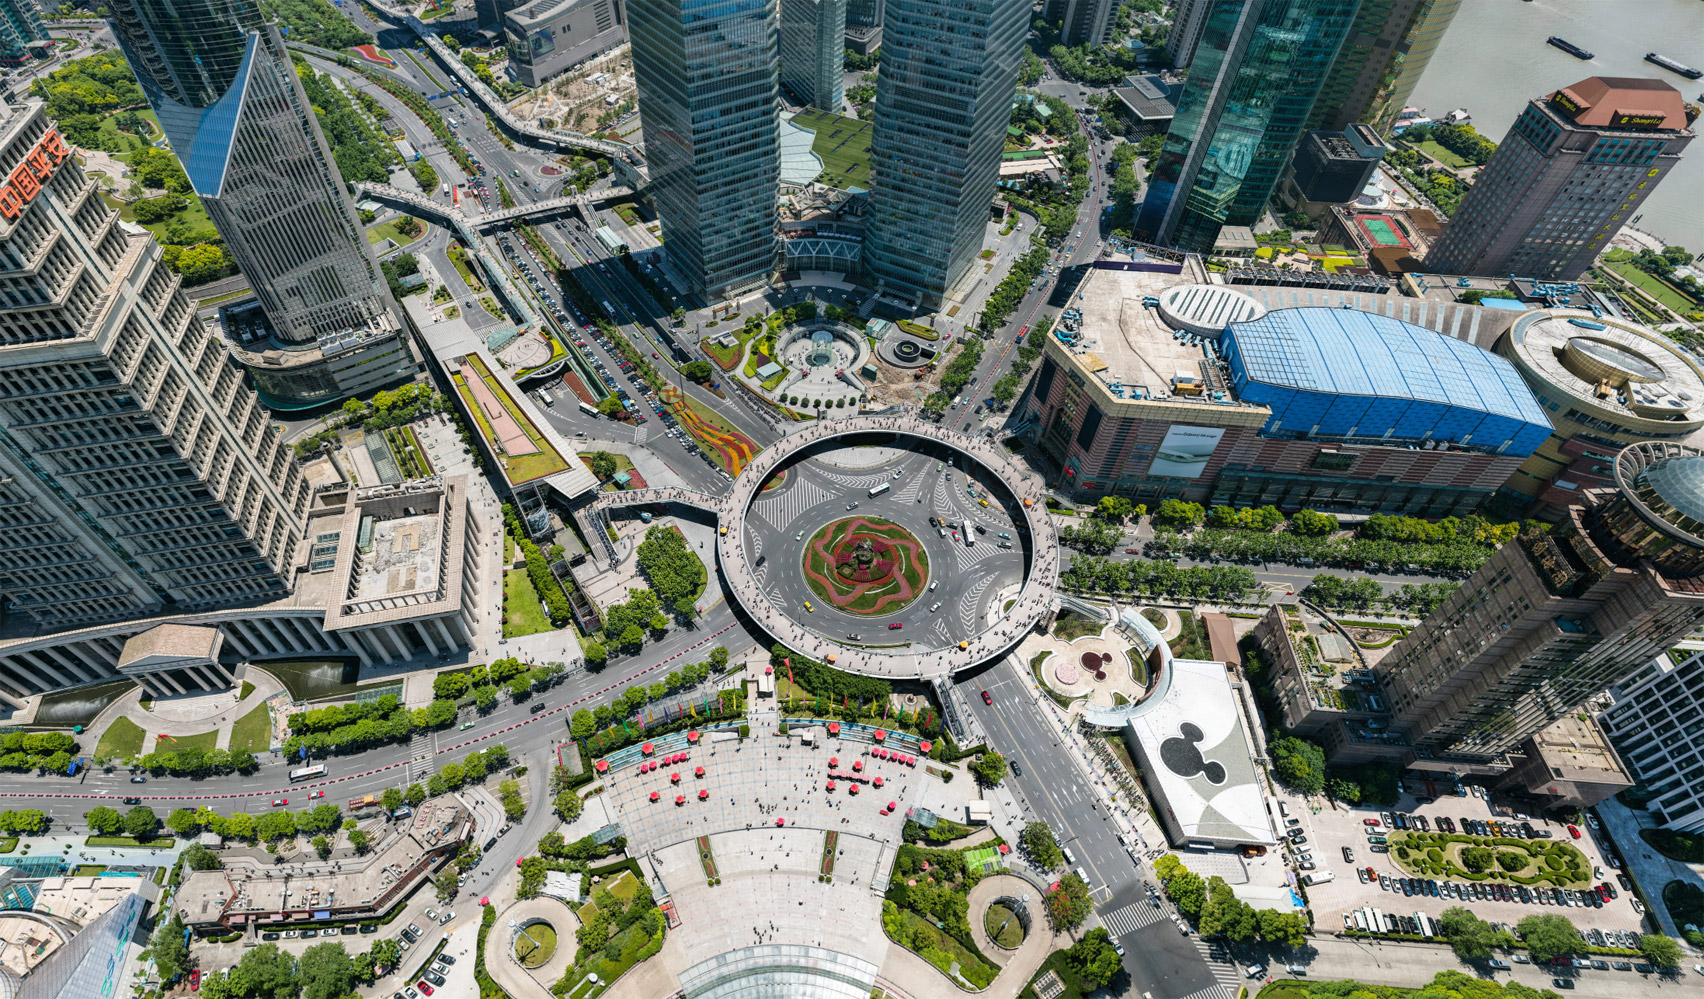 195-gigapixel photo of Shanghai by Bigpixel Technology